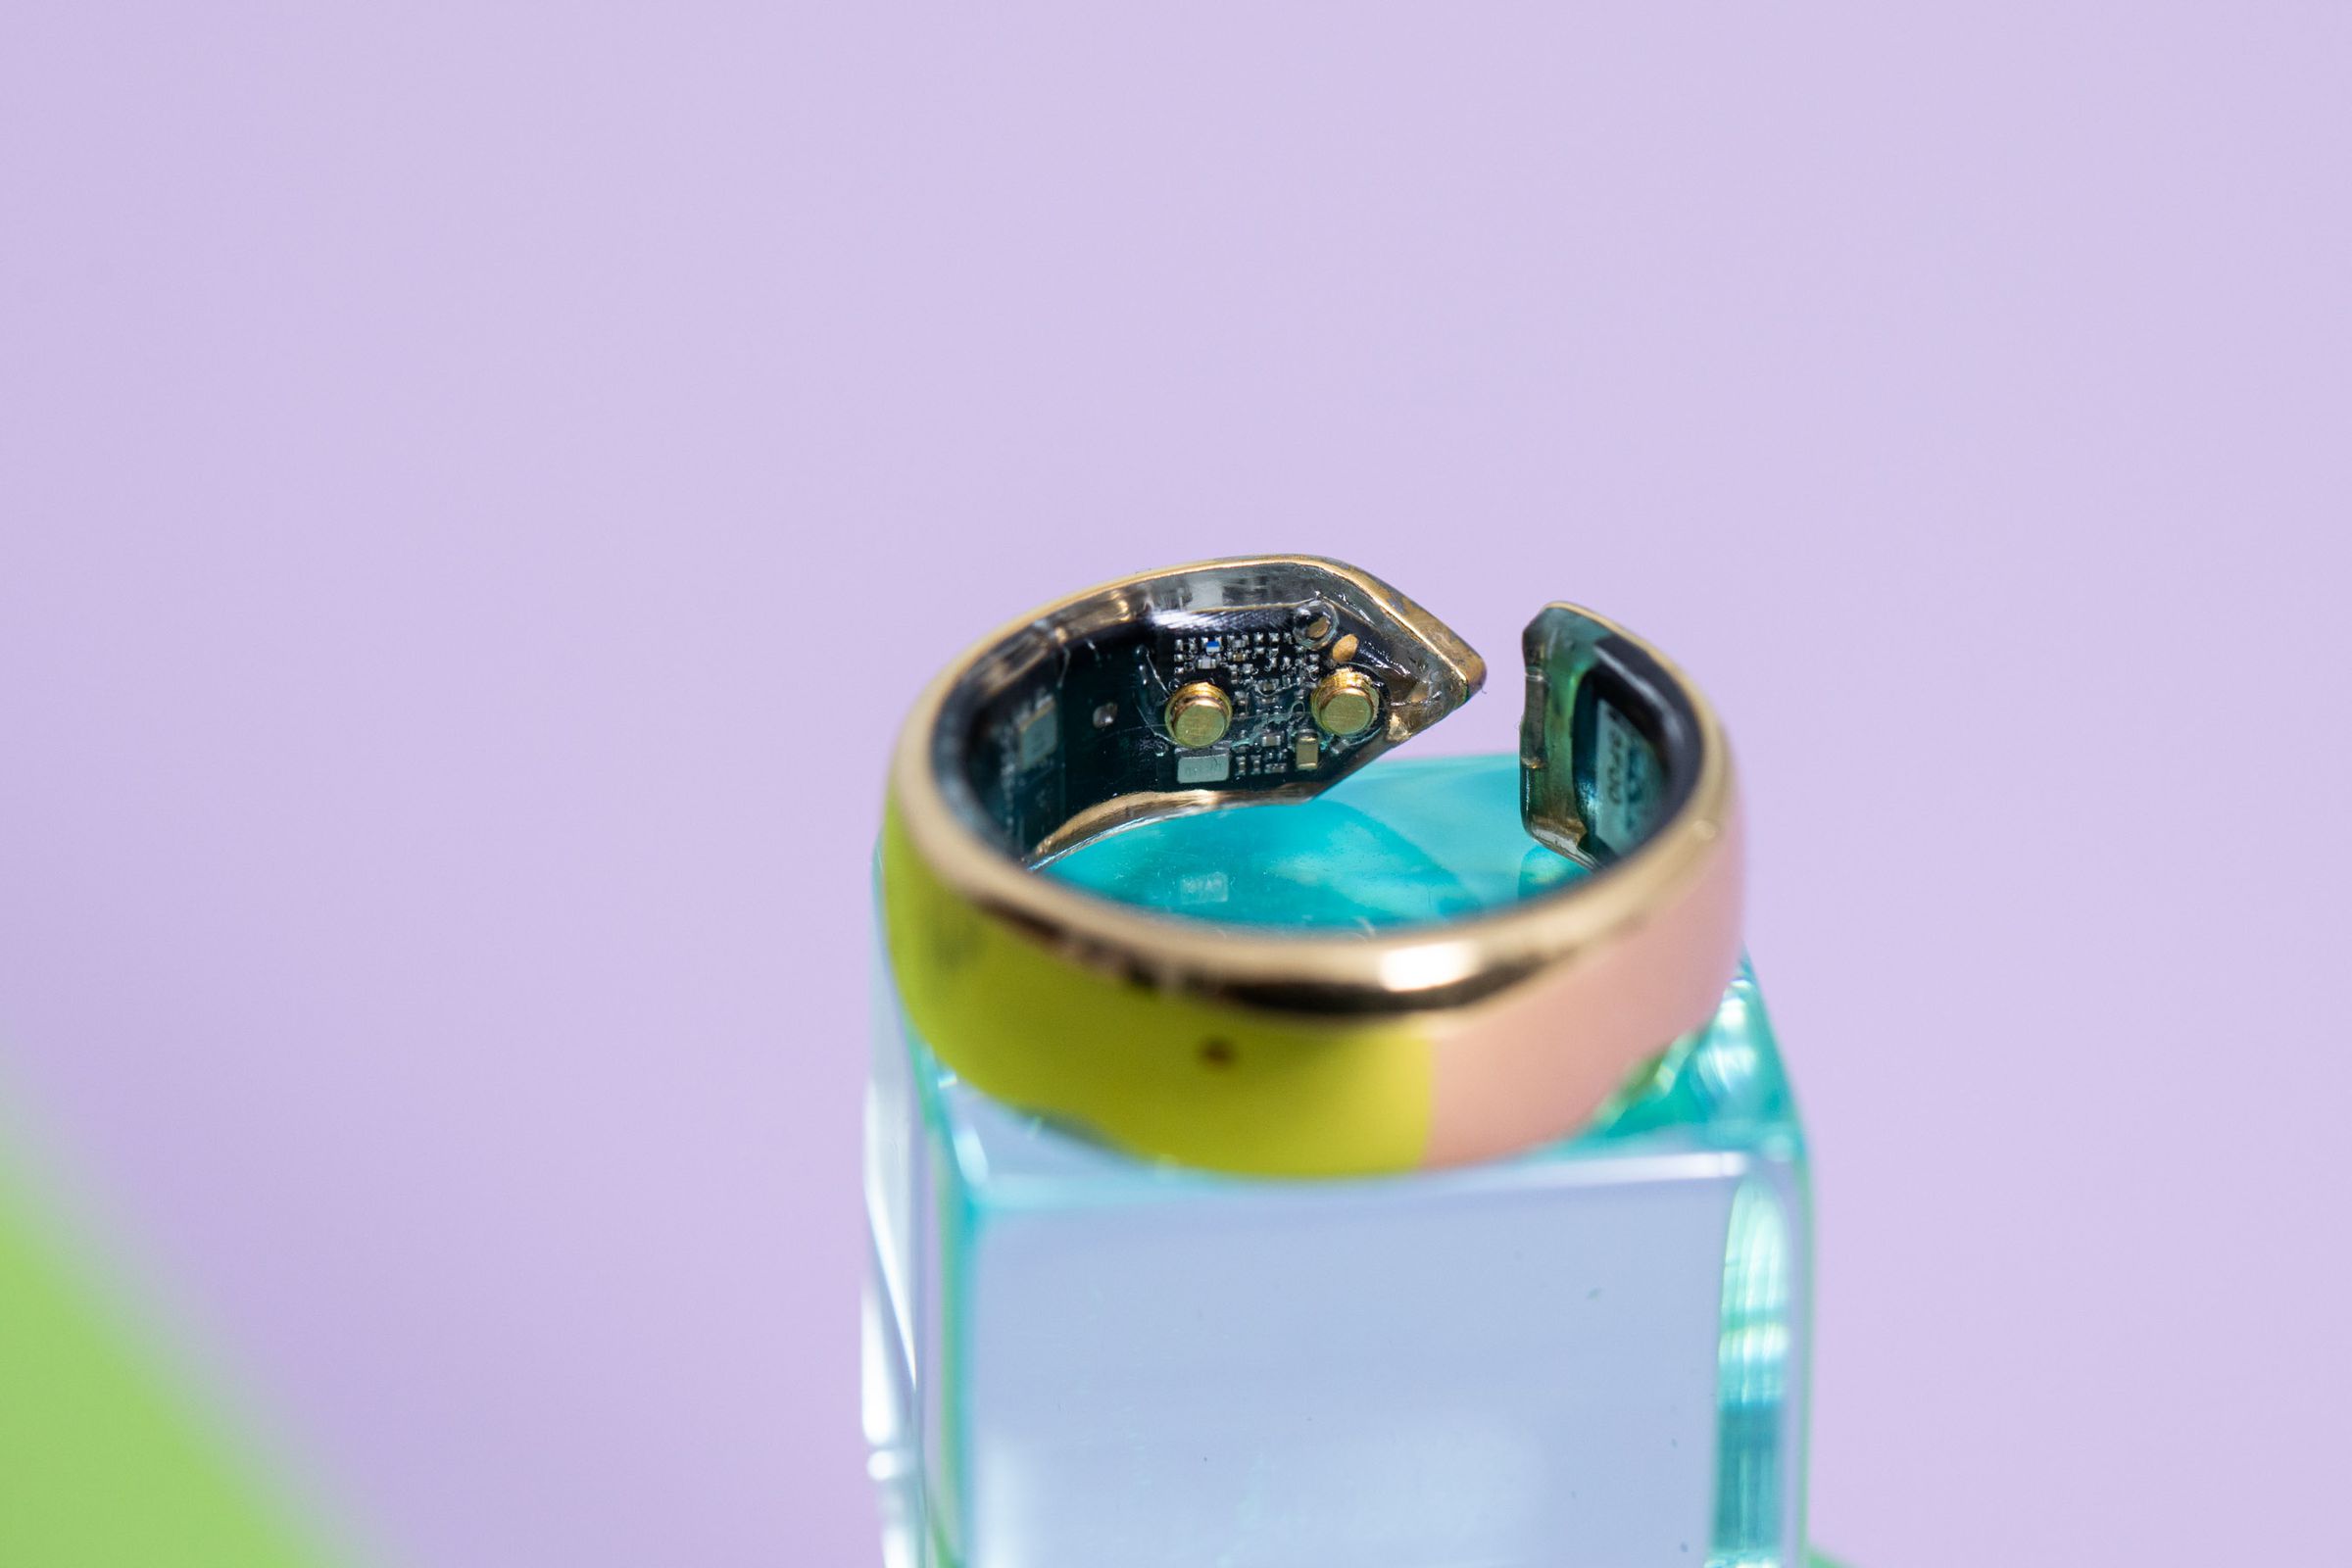 Close up of the Evie Ring that shows some of its sensors.